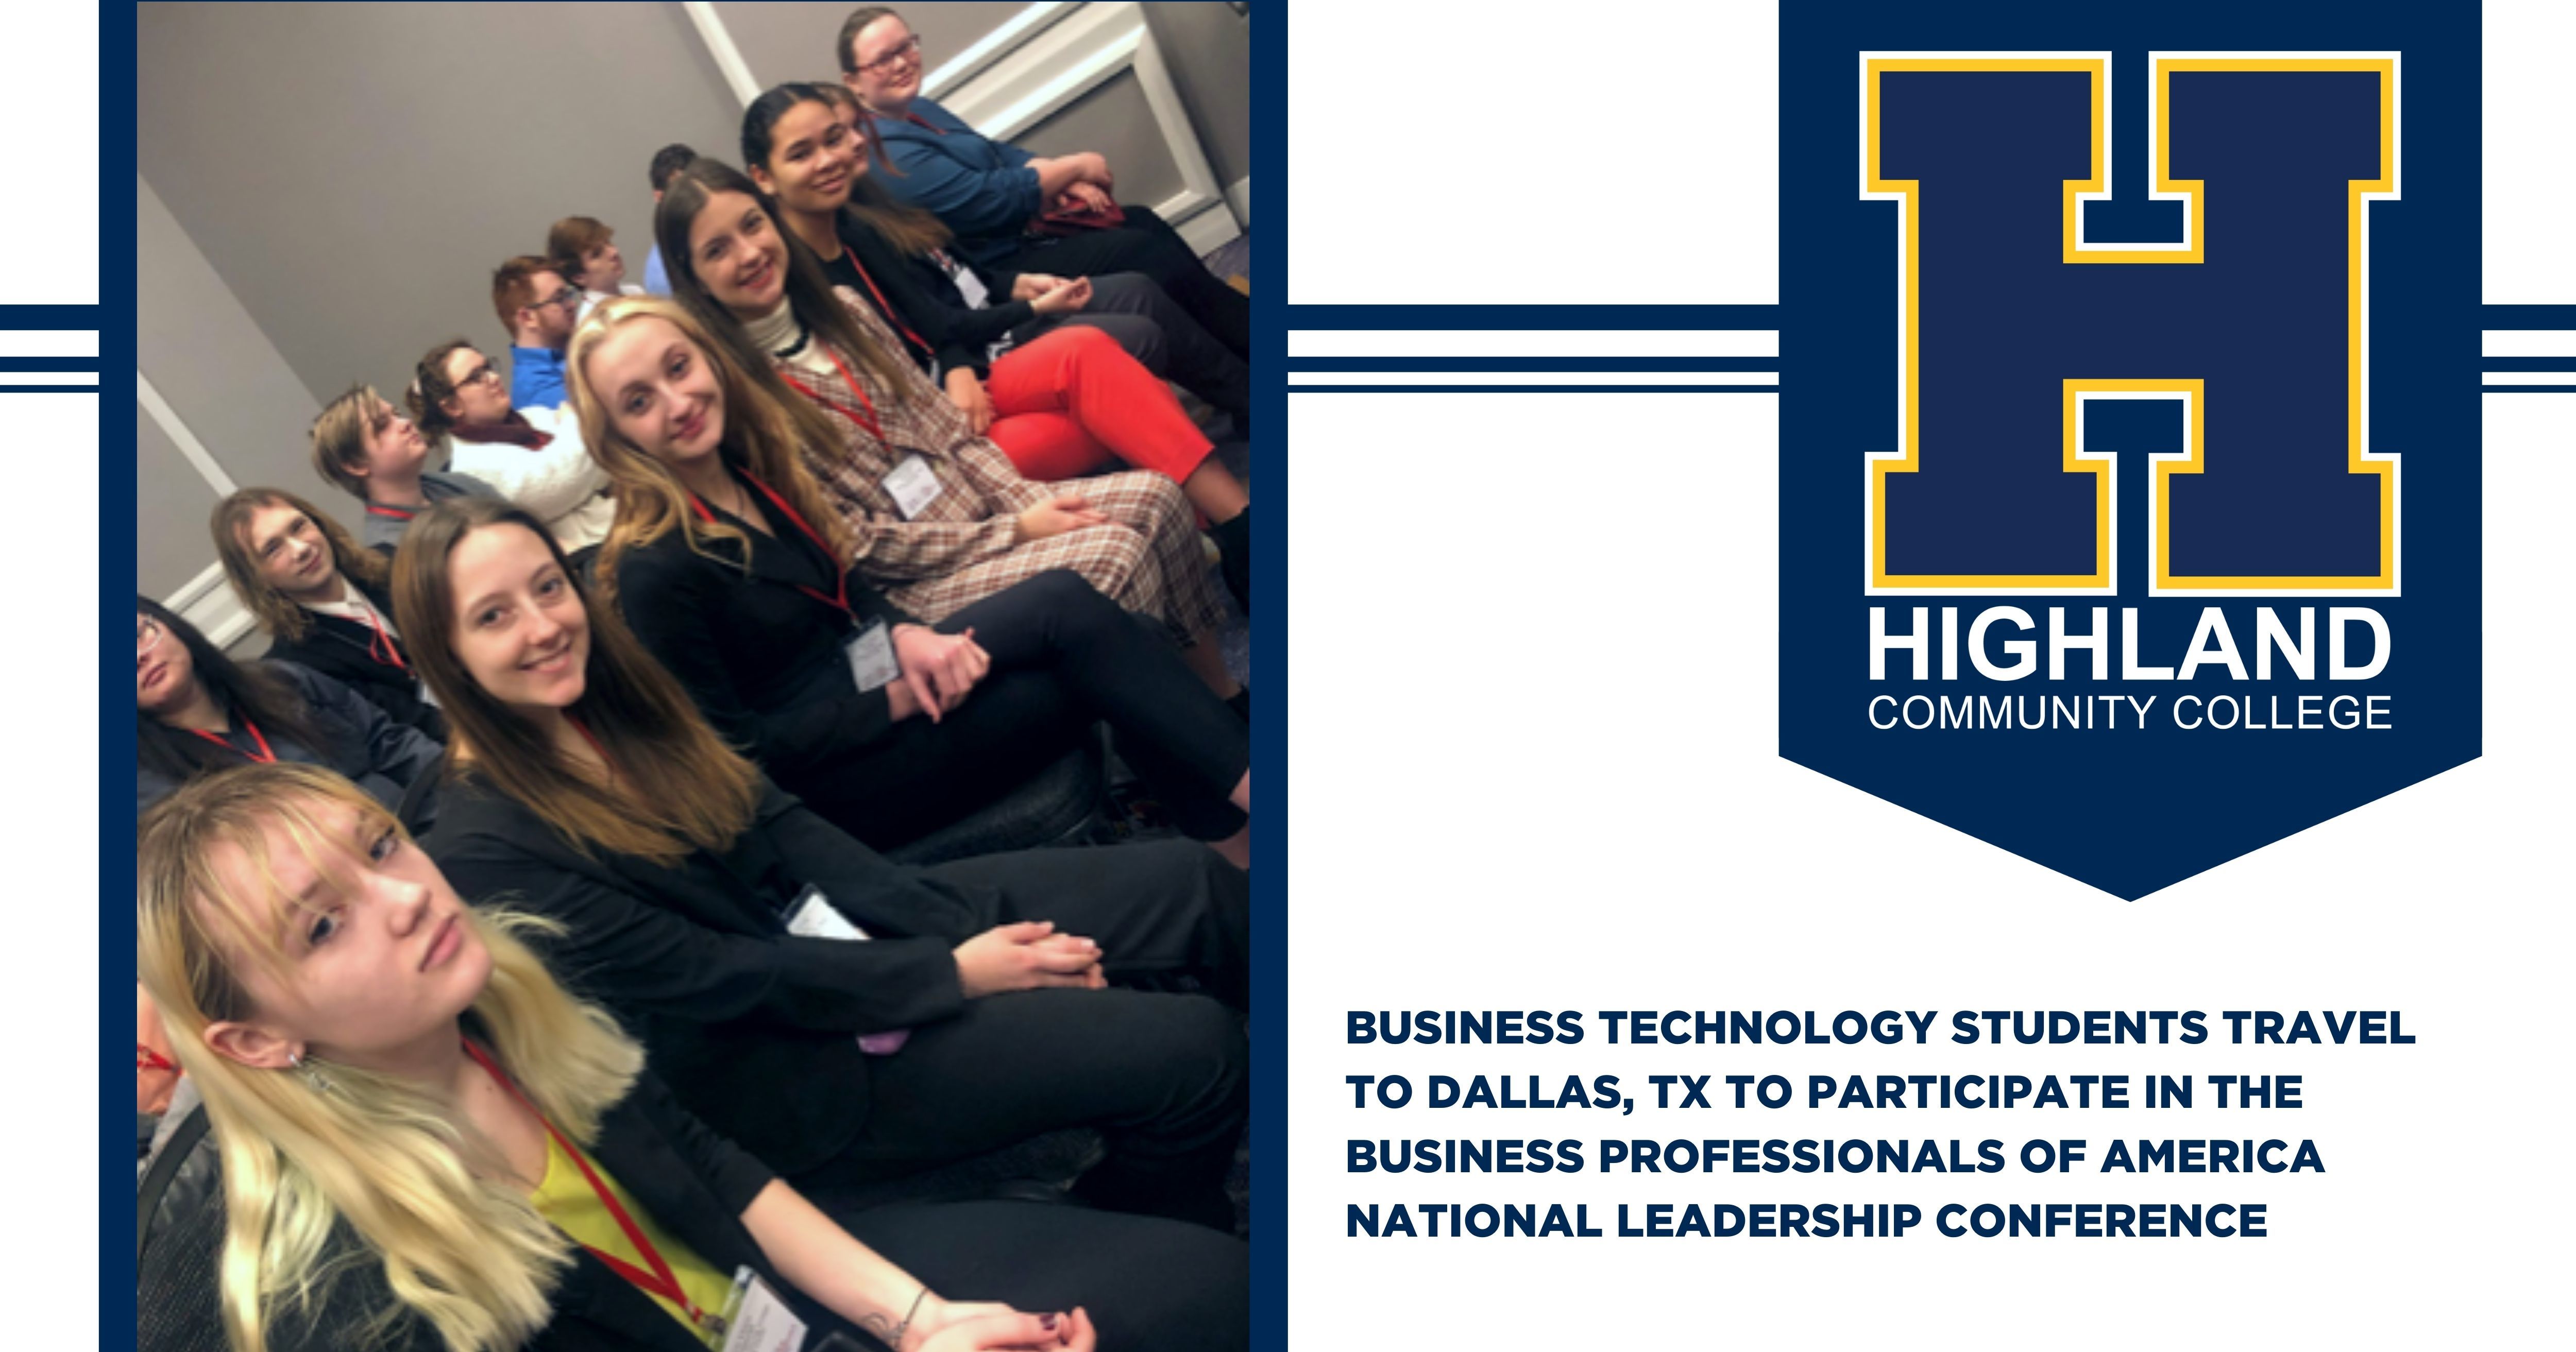 Business Technology Students Will Travel to Dallas, TX to Participate in the Business Professionals of America National Leadership Conference